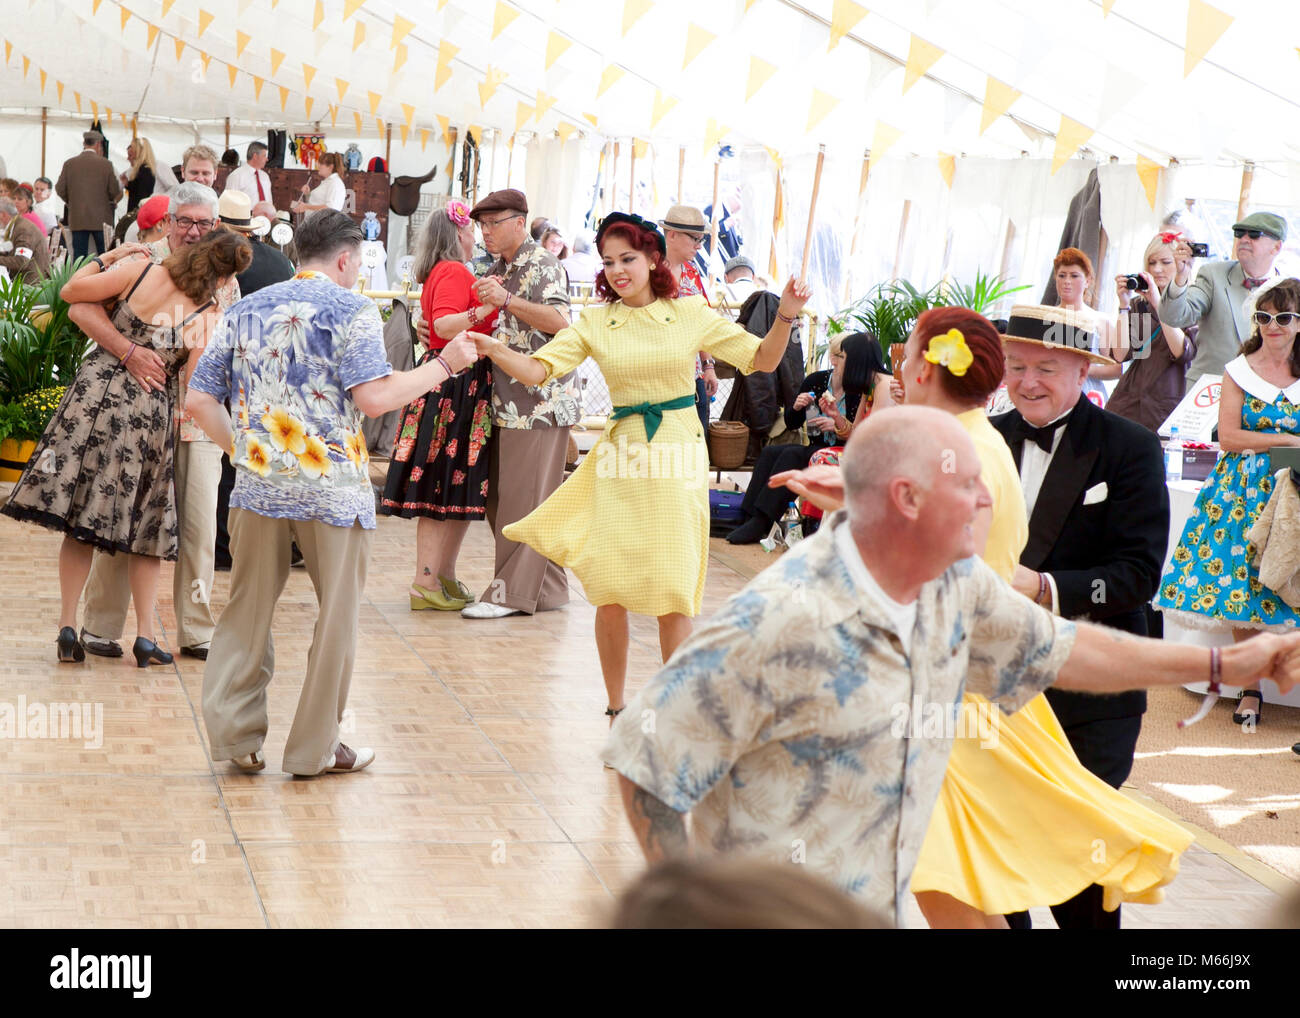 1950's dance at the Goodwood revival with vintage clothes brightly coloured shirts and dresses Stock Photo